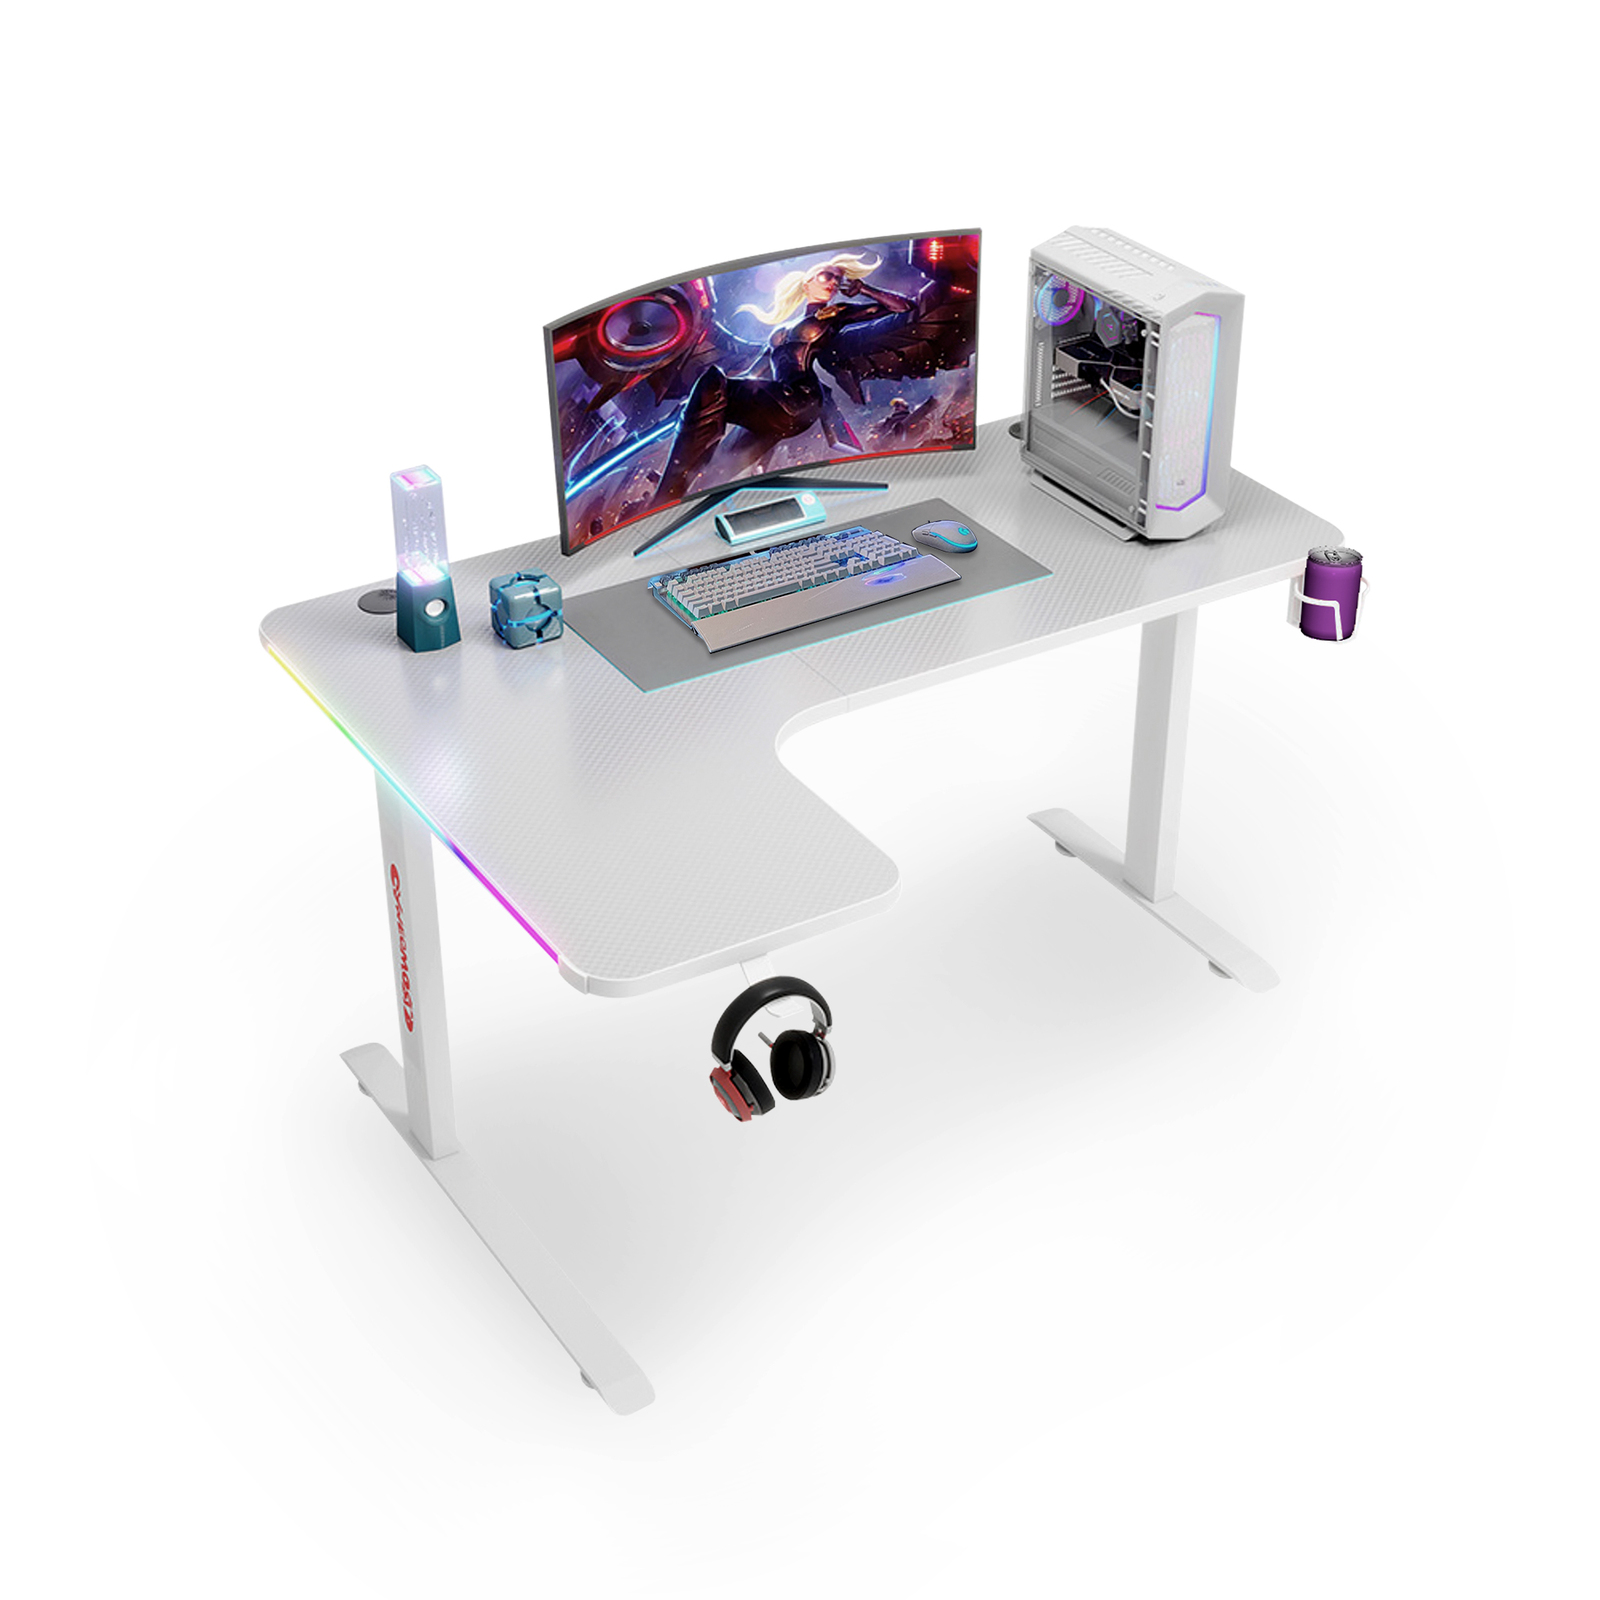 160cm White RGB LED Gaming Desk Computer Home Office Writing Desk Racer Table Carbon Fiber Table With Cup Holder and Headphone Hook